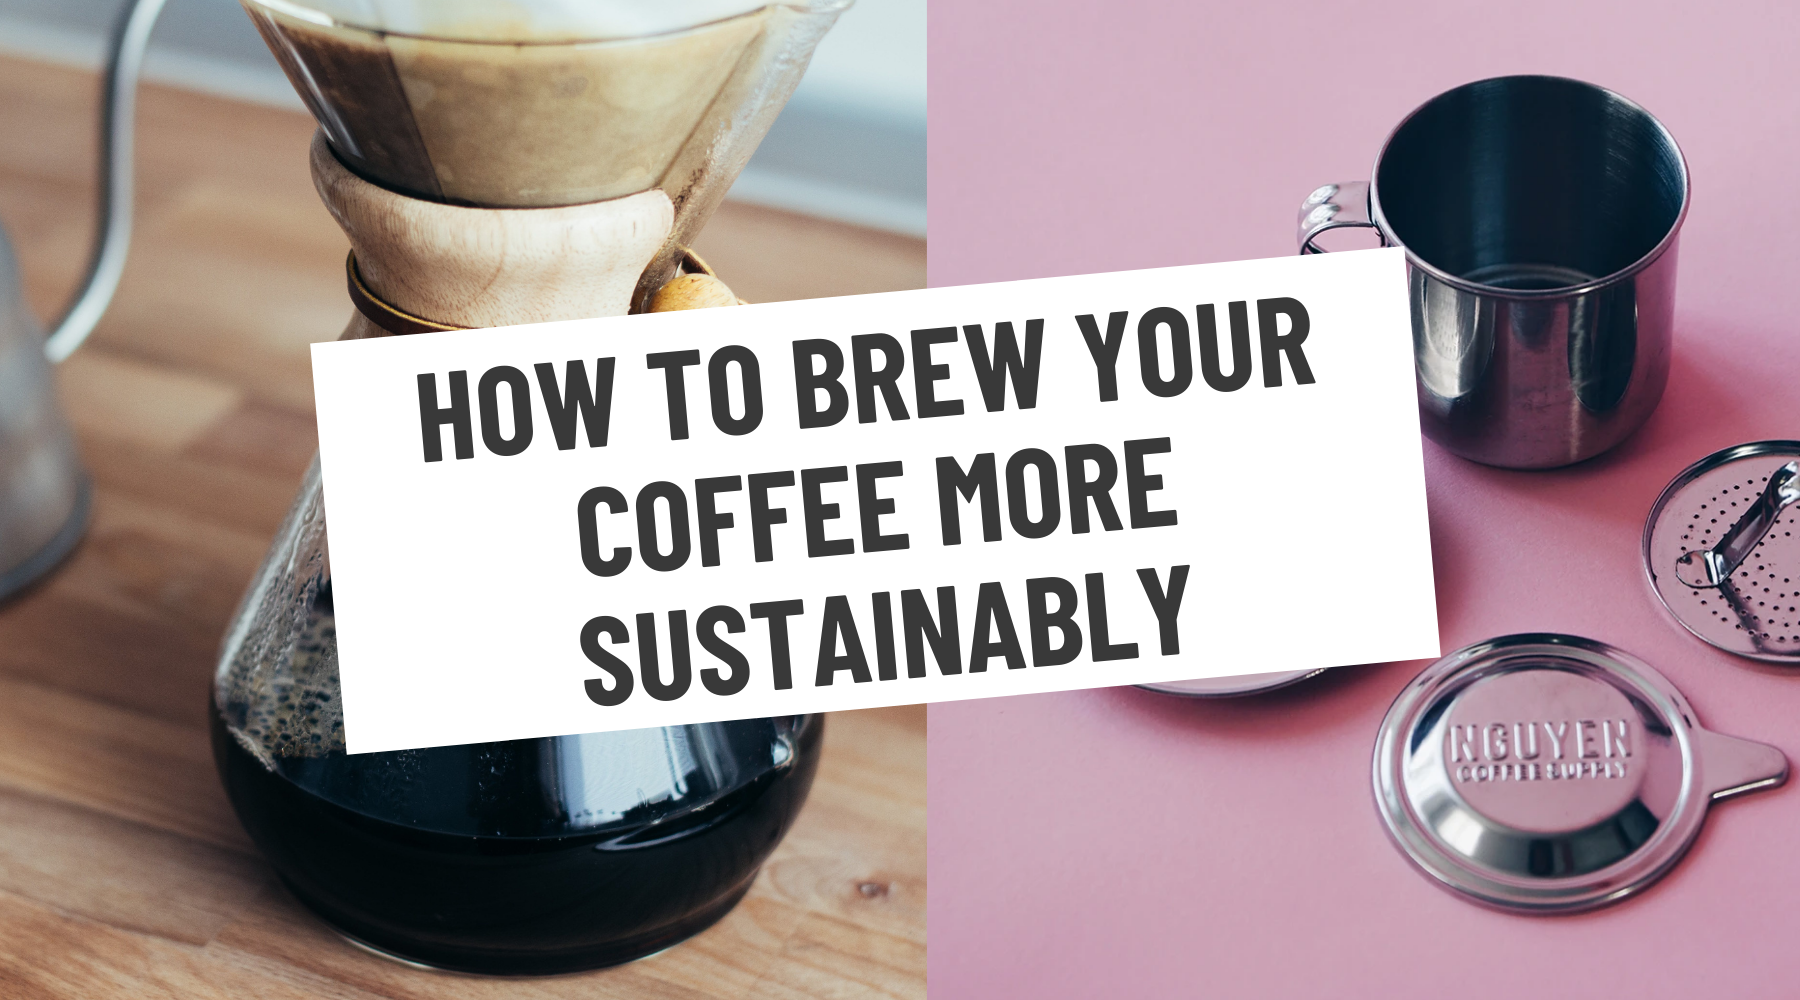 How to brew your coffee more sustainably